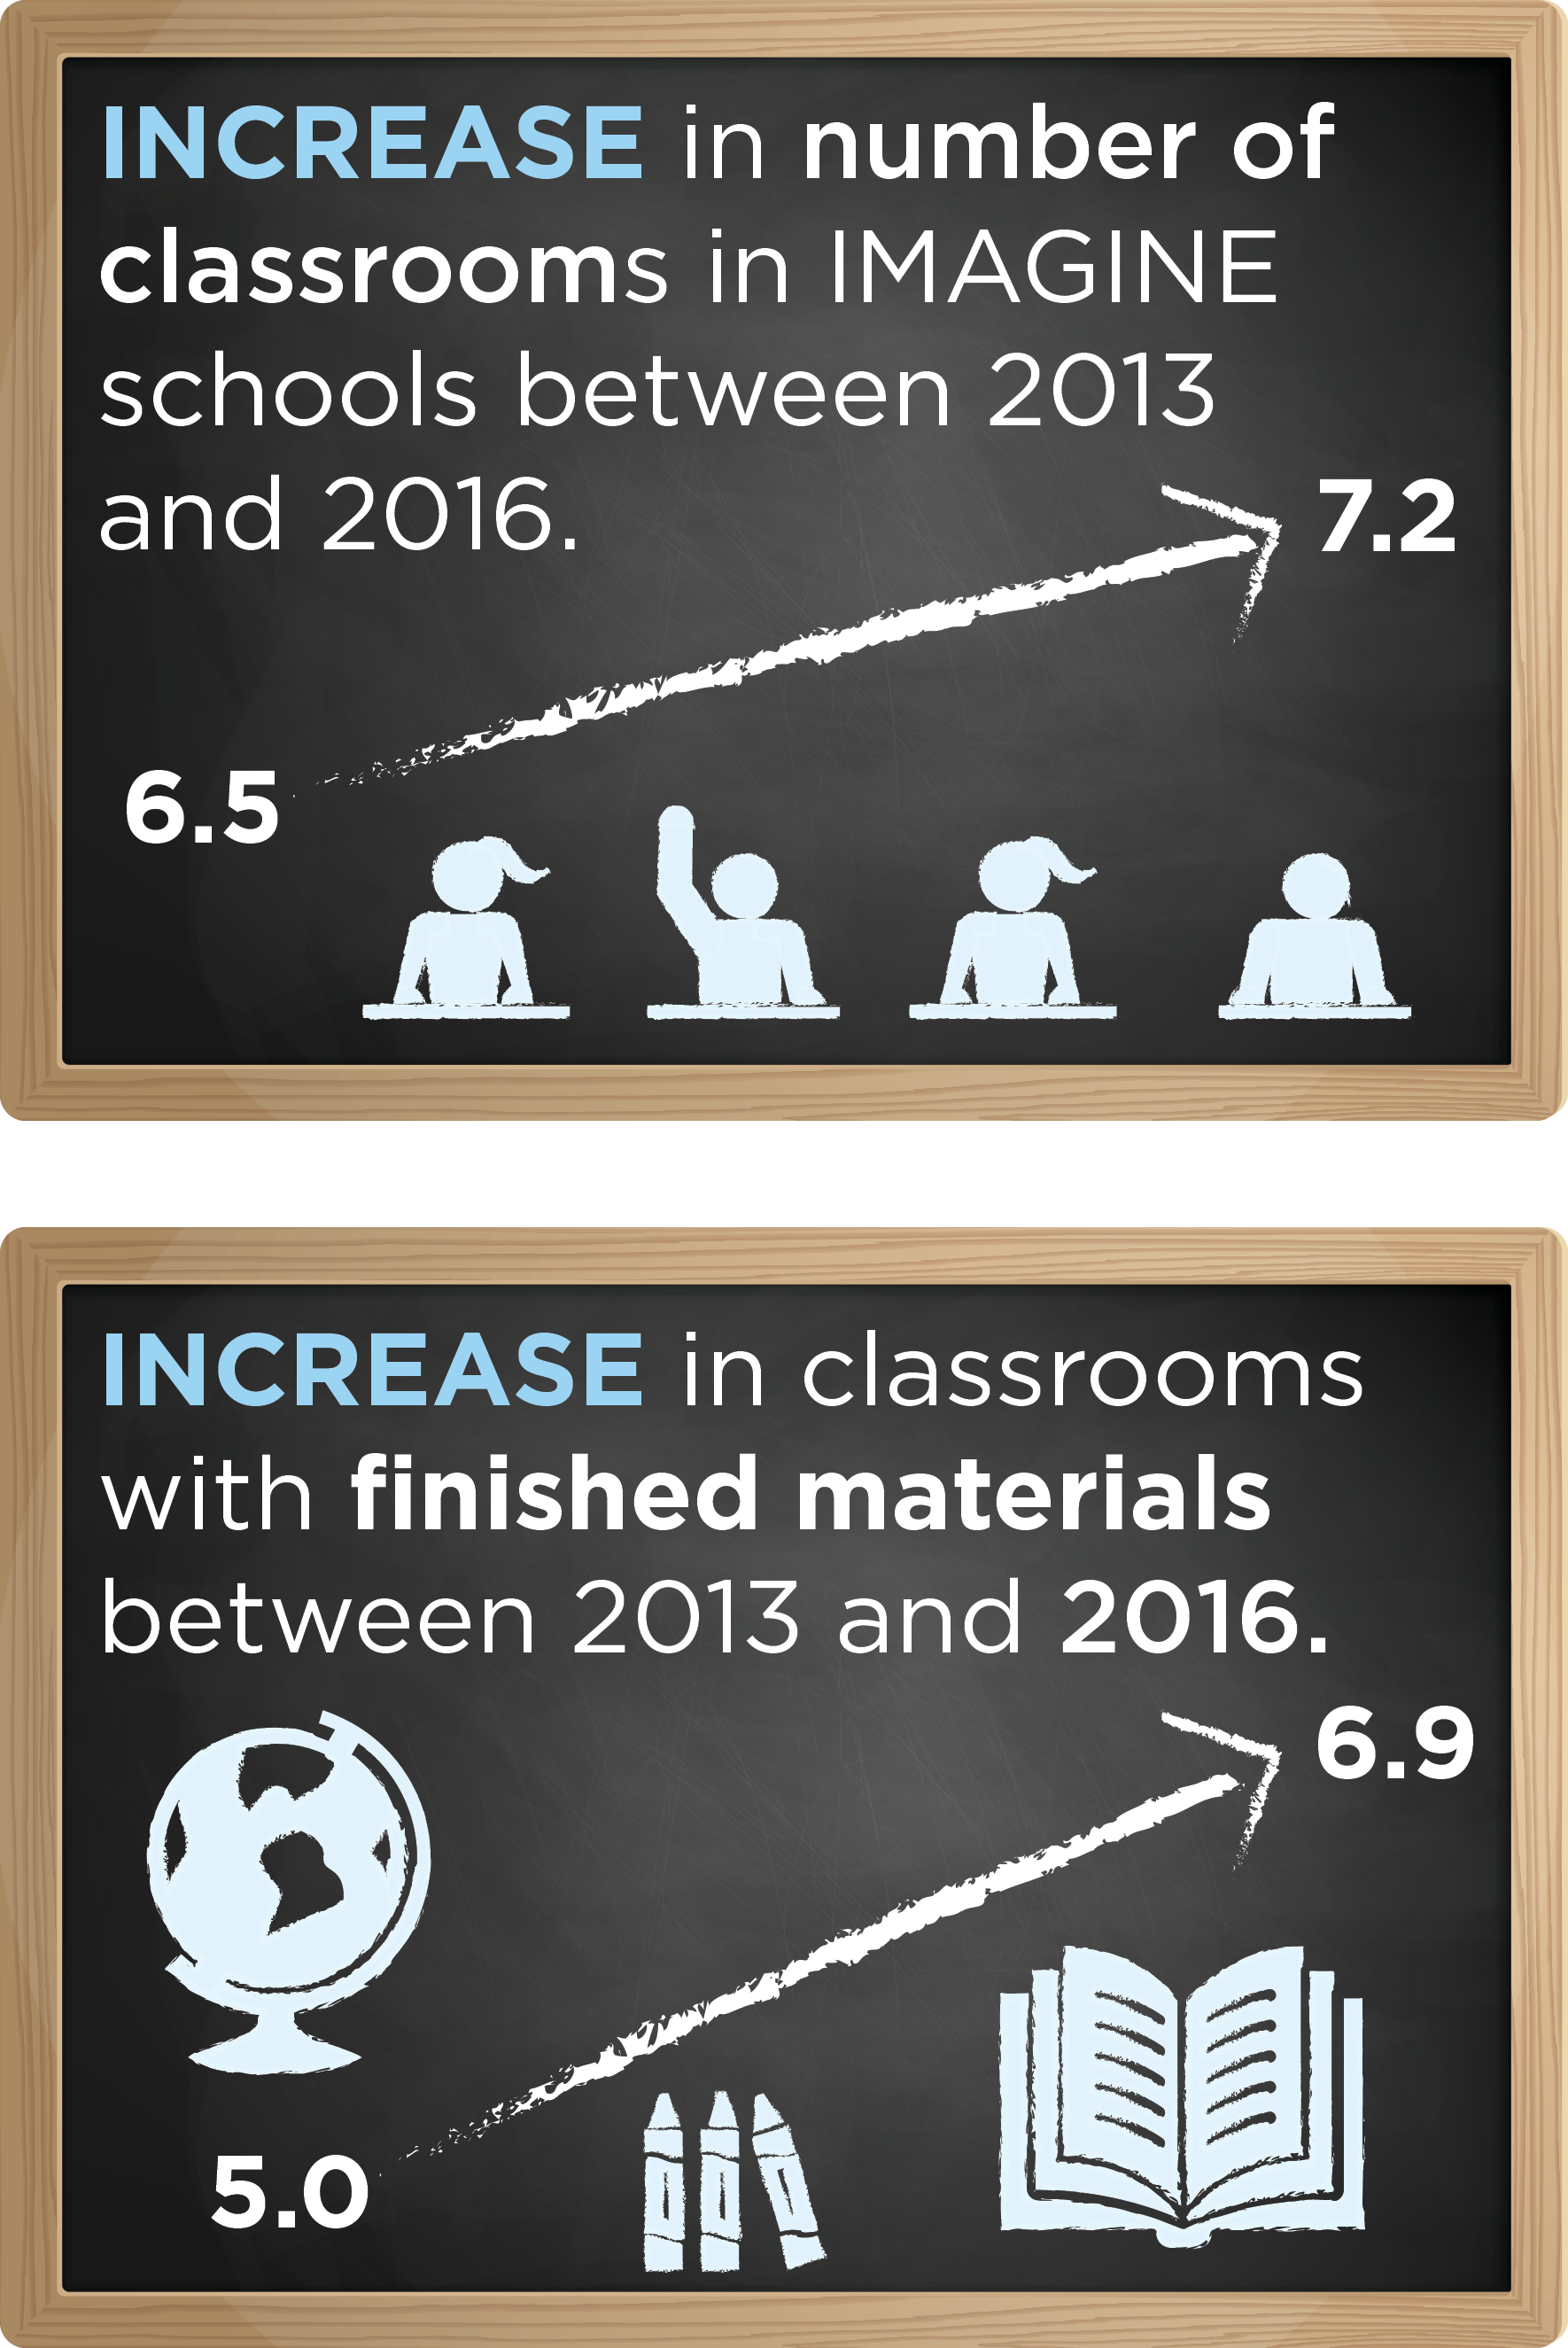 Classrooms overall and classrooms with finished materials increased between 2013 and 2016